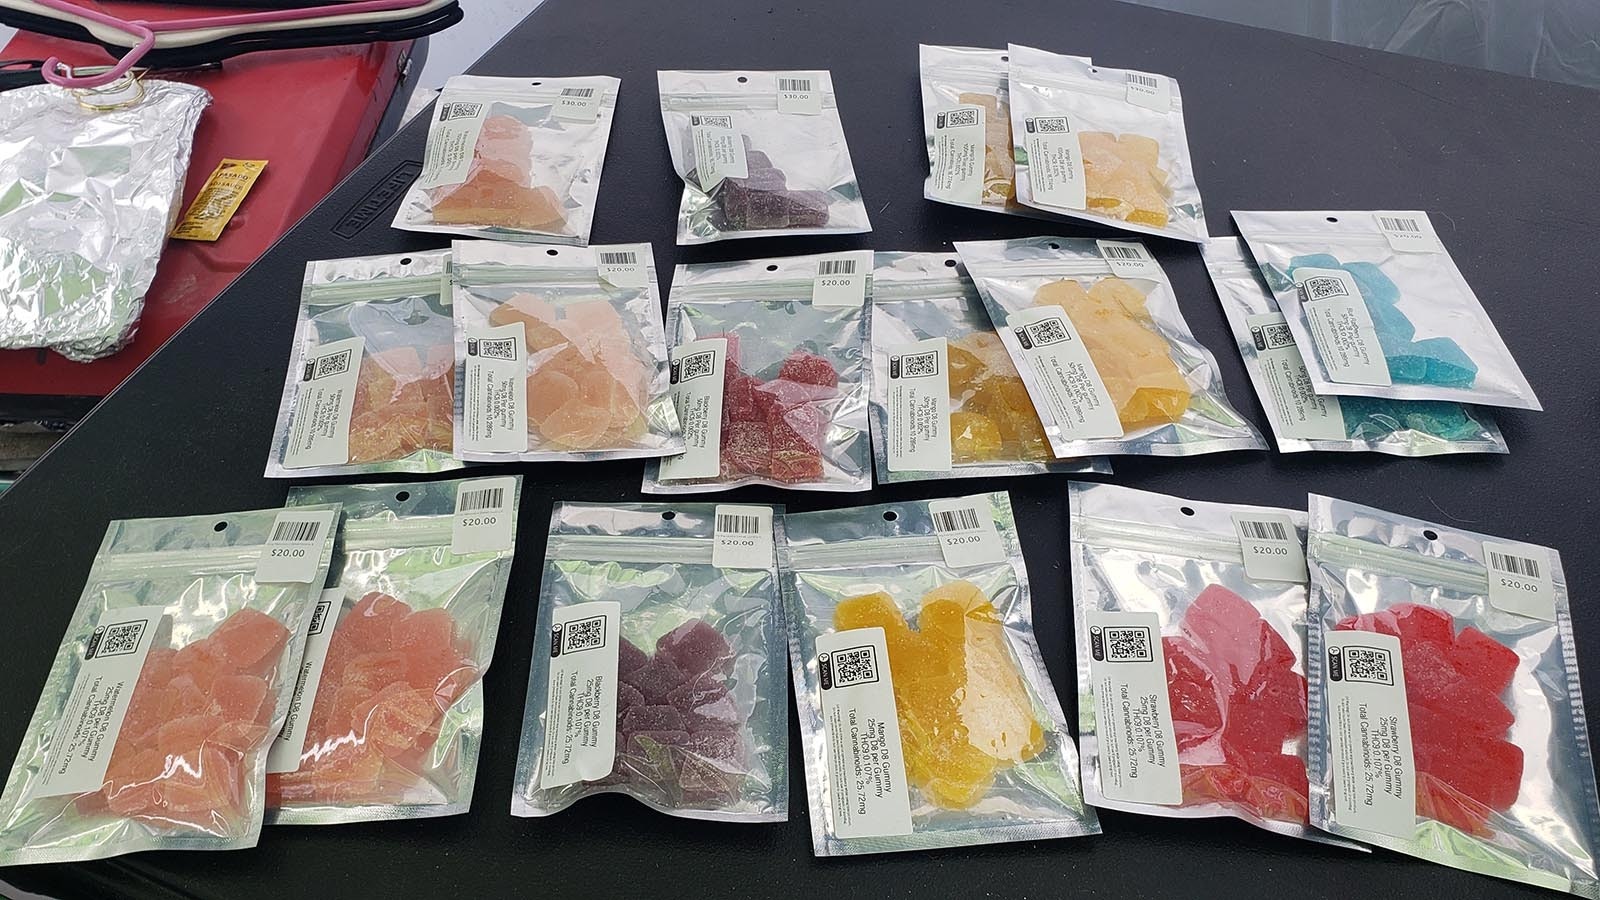 Gummies are Platte Hemp Co.'s N.o 1 seller. The owner, Sam Watt, fears that Senate File 32 will completely outlaw all of the hemp products he sells, even if they contain 0.3% or less of all THC isomers.